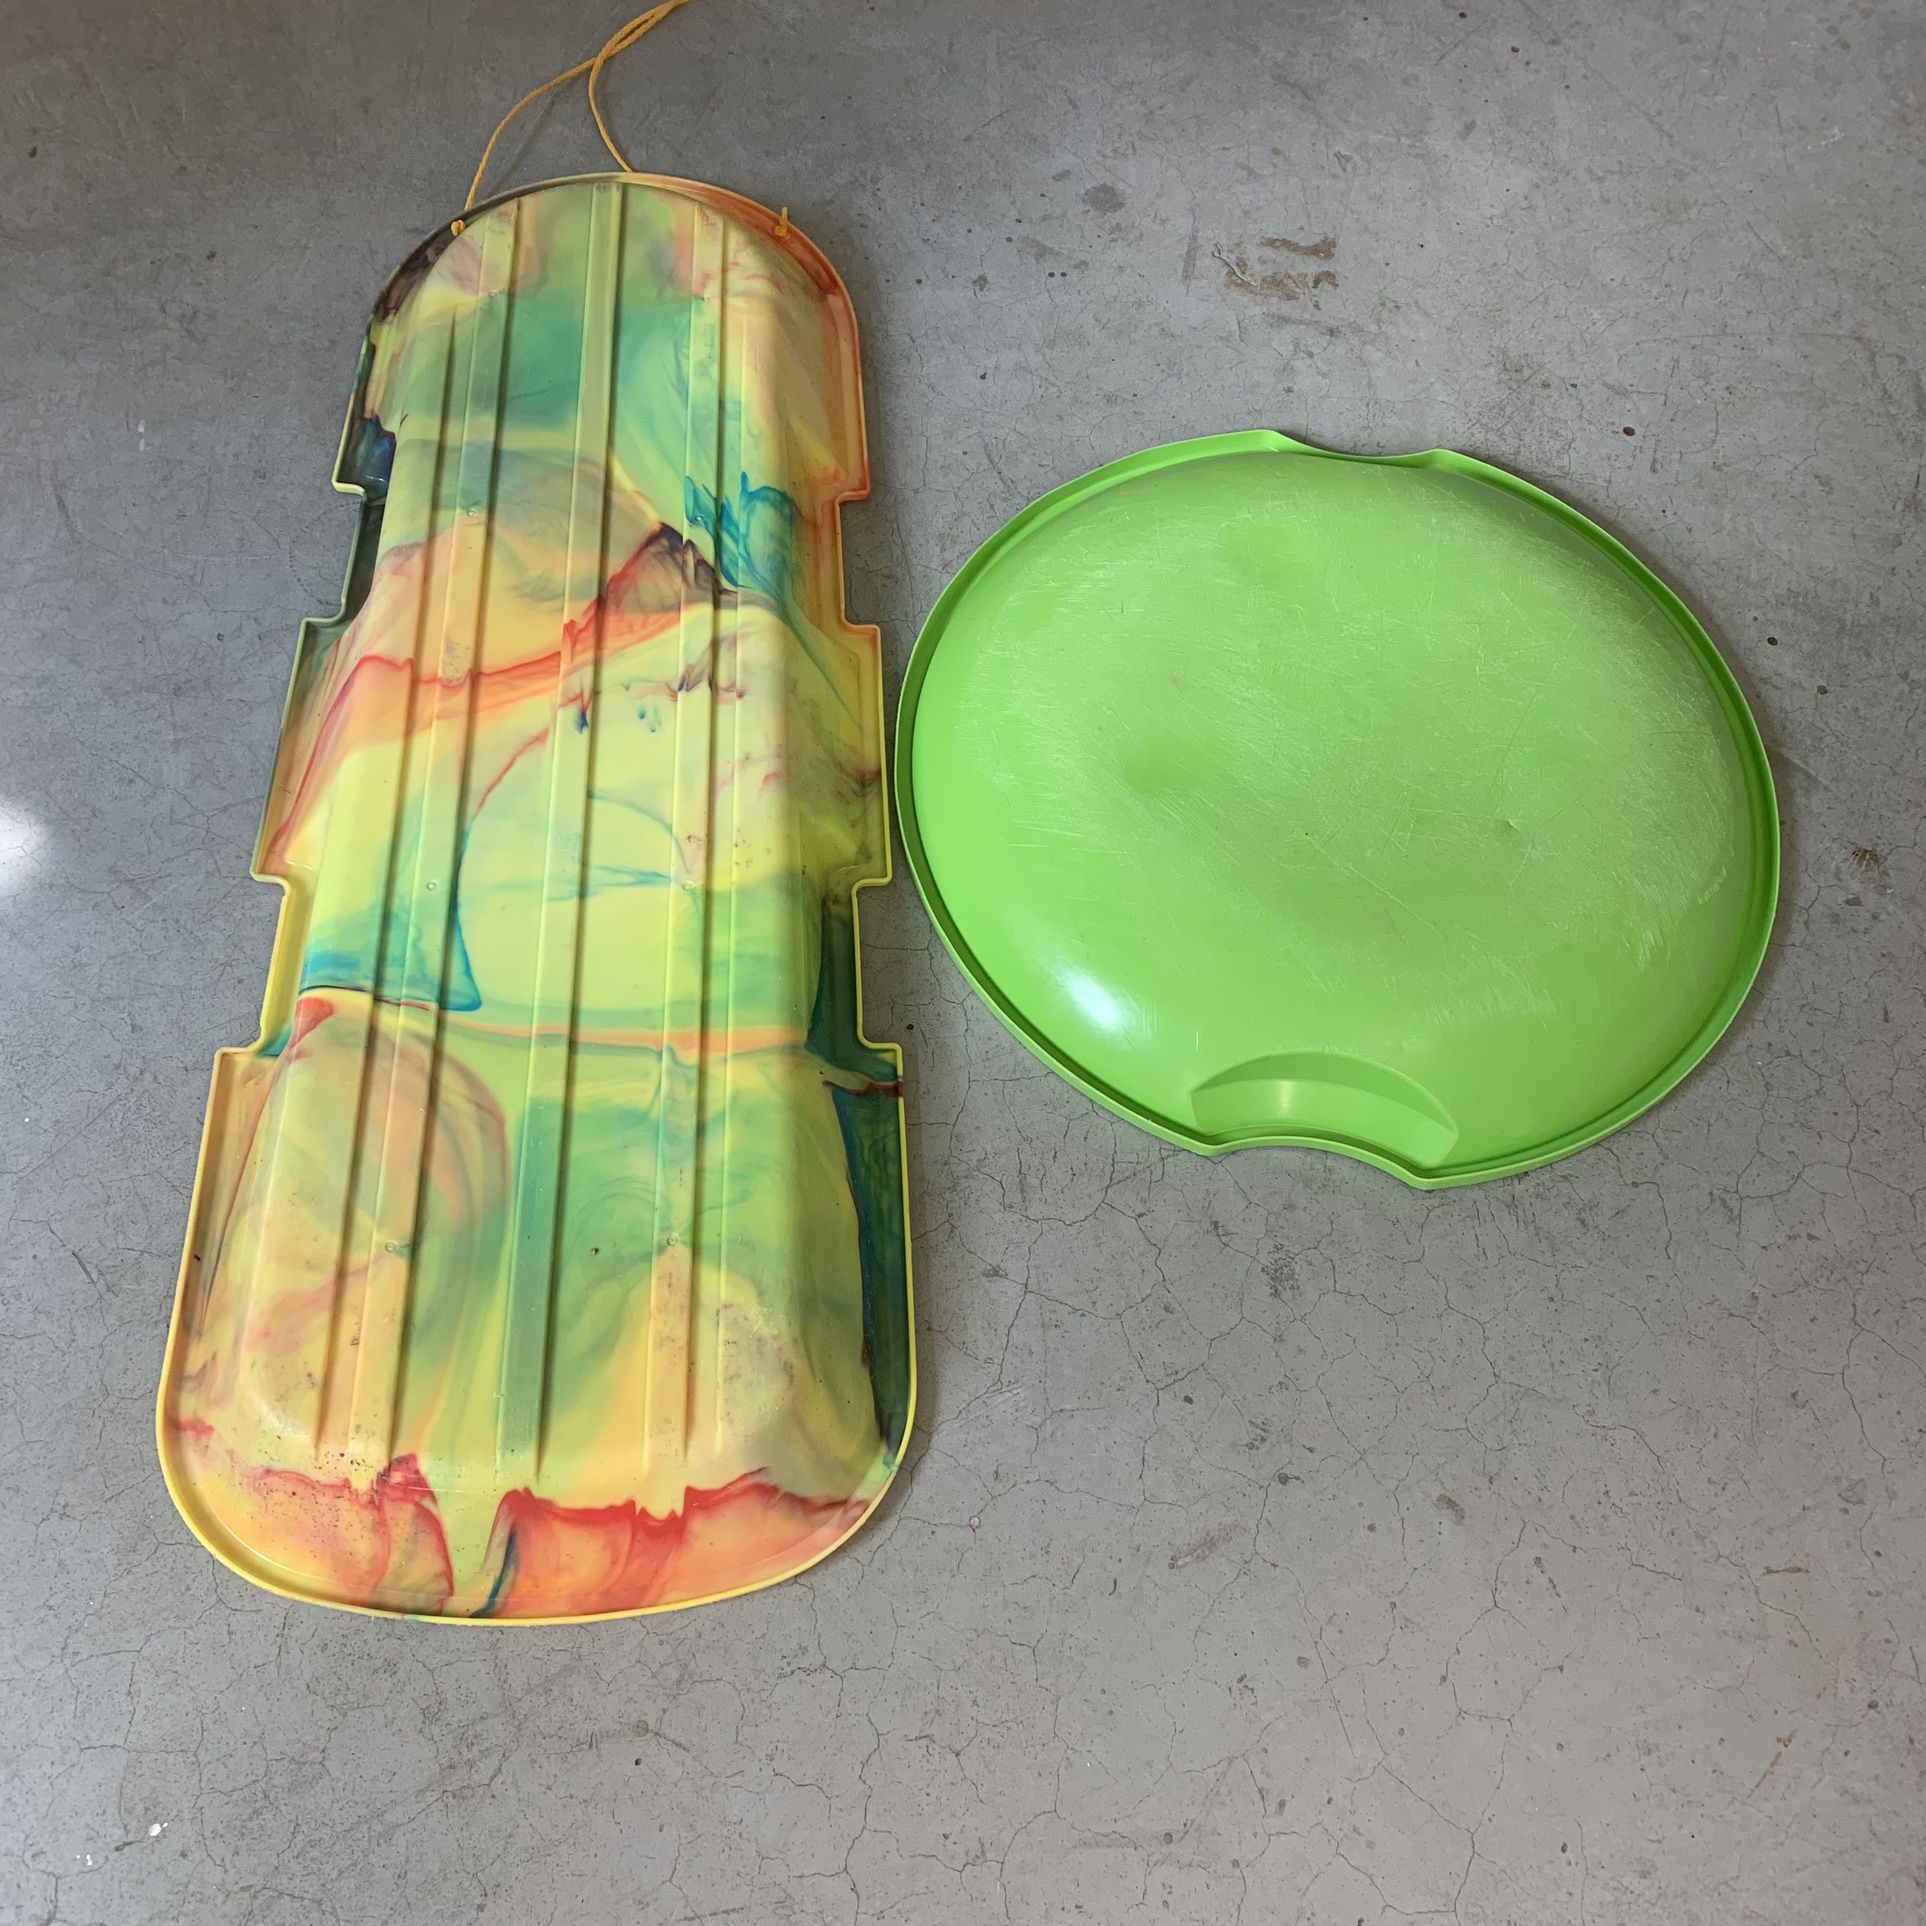 Two Plastic Snow Sleds - One Saucer style and One 2-Person Toboggan style  Be ready for the snow and sledding! ❄️ ⛄️   Great pre-owned condition.   Pr